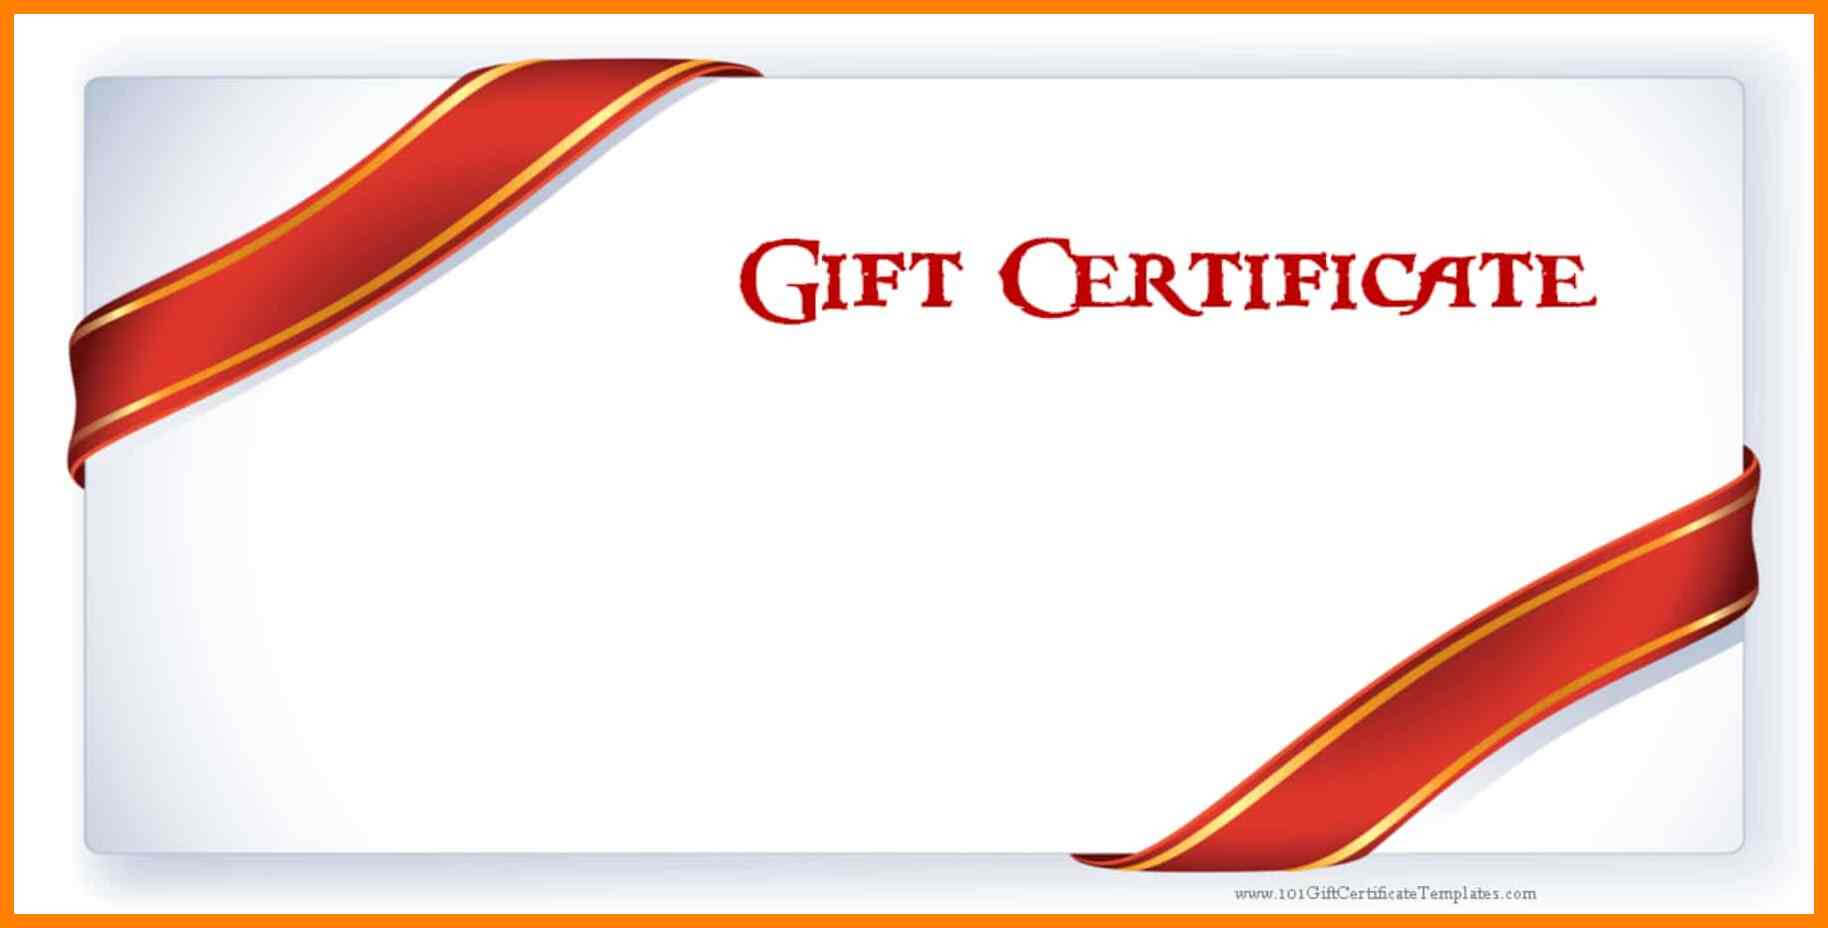 8+ Free Printable Gift Vouchers Templates | St Within Printable Gift Certificates Templates Free